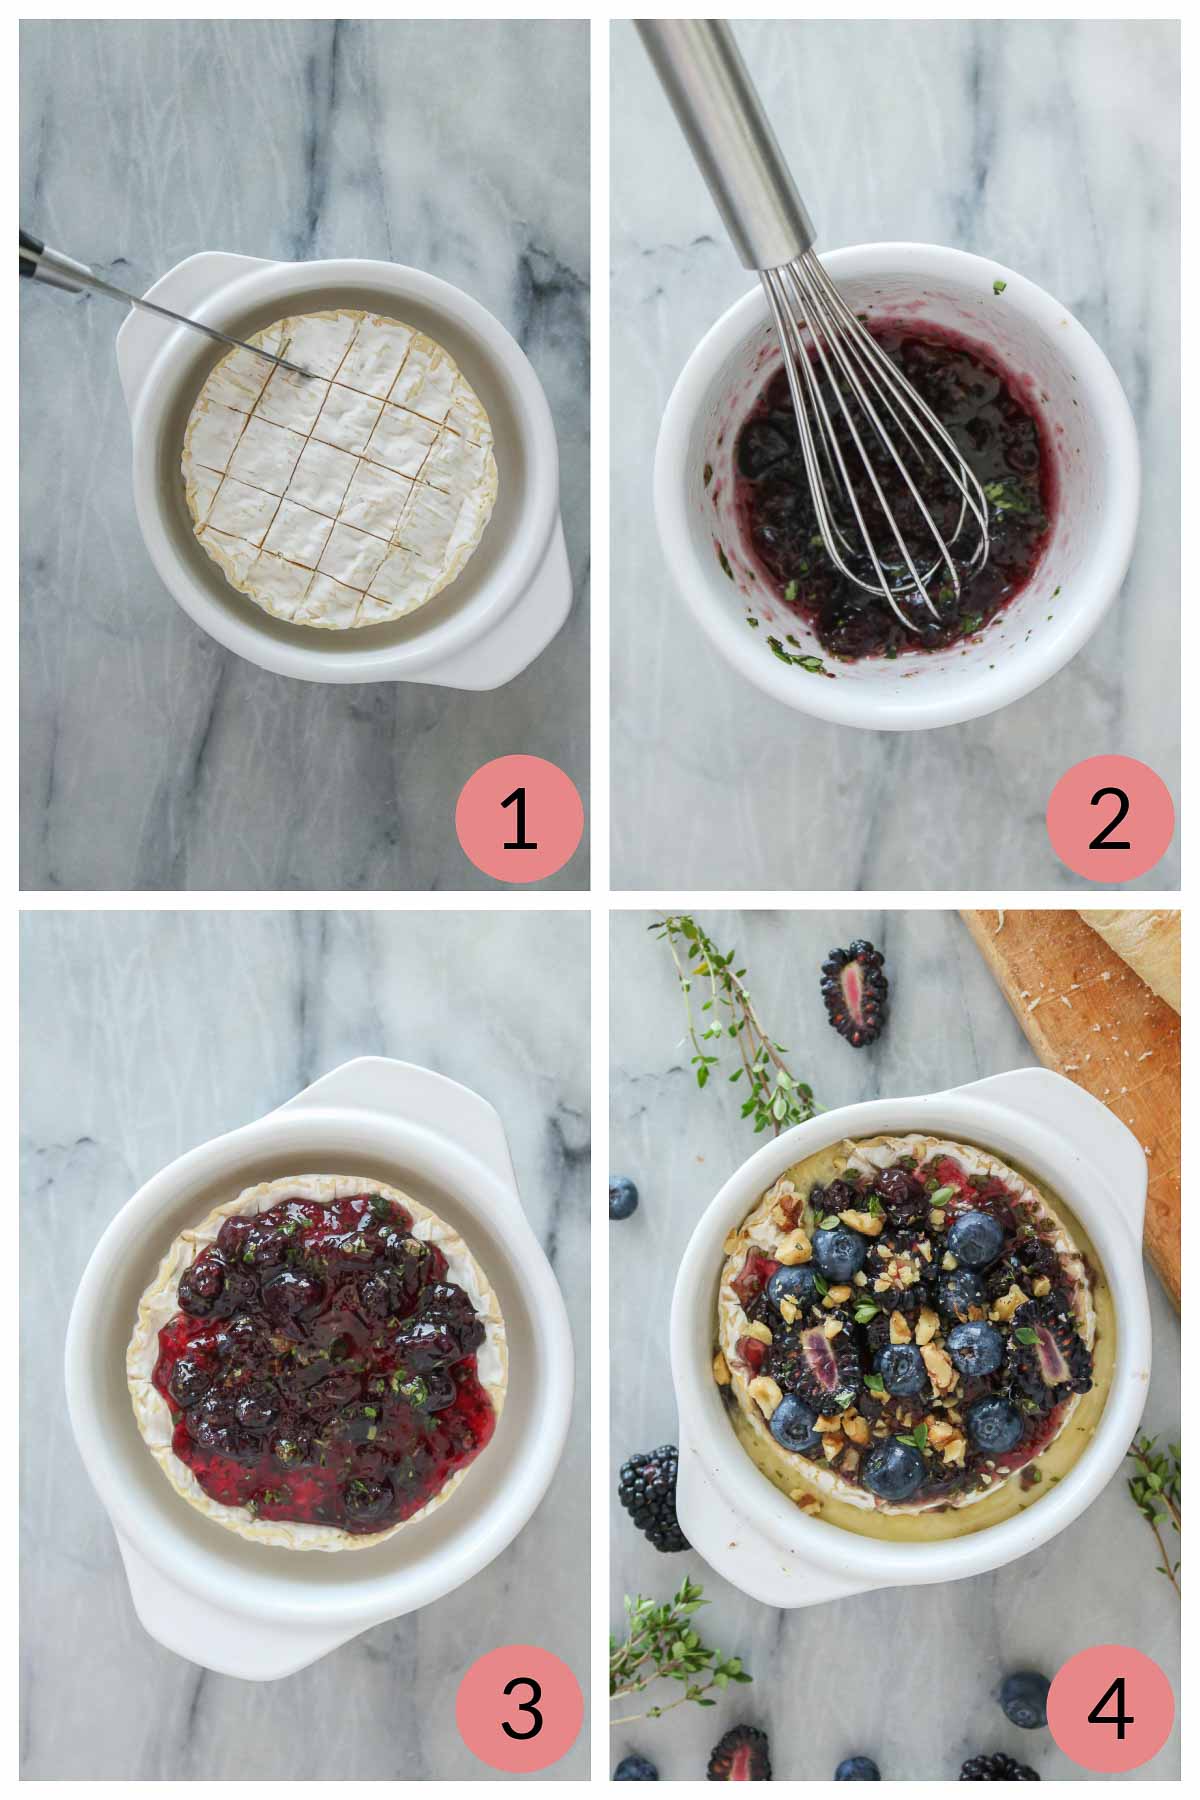 Collage of steps to make a baked camembert recipe.